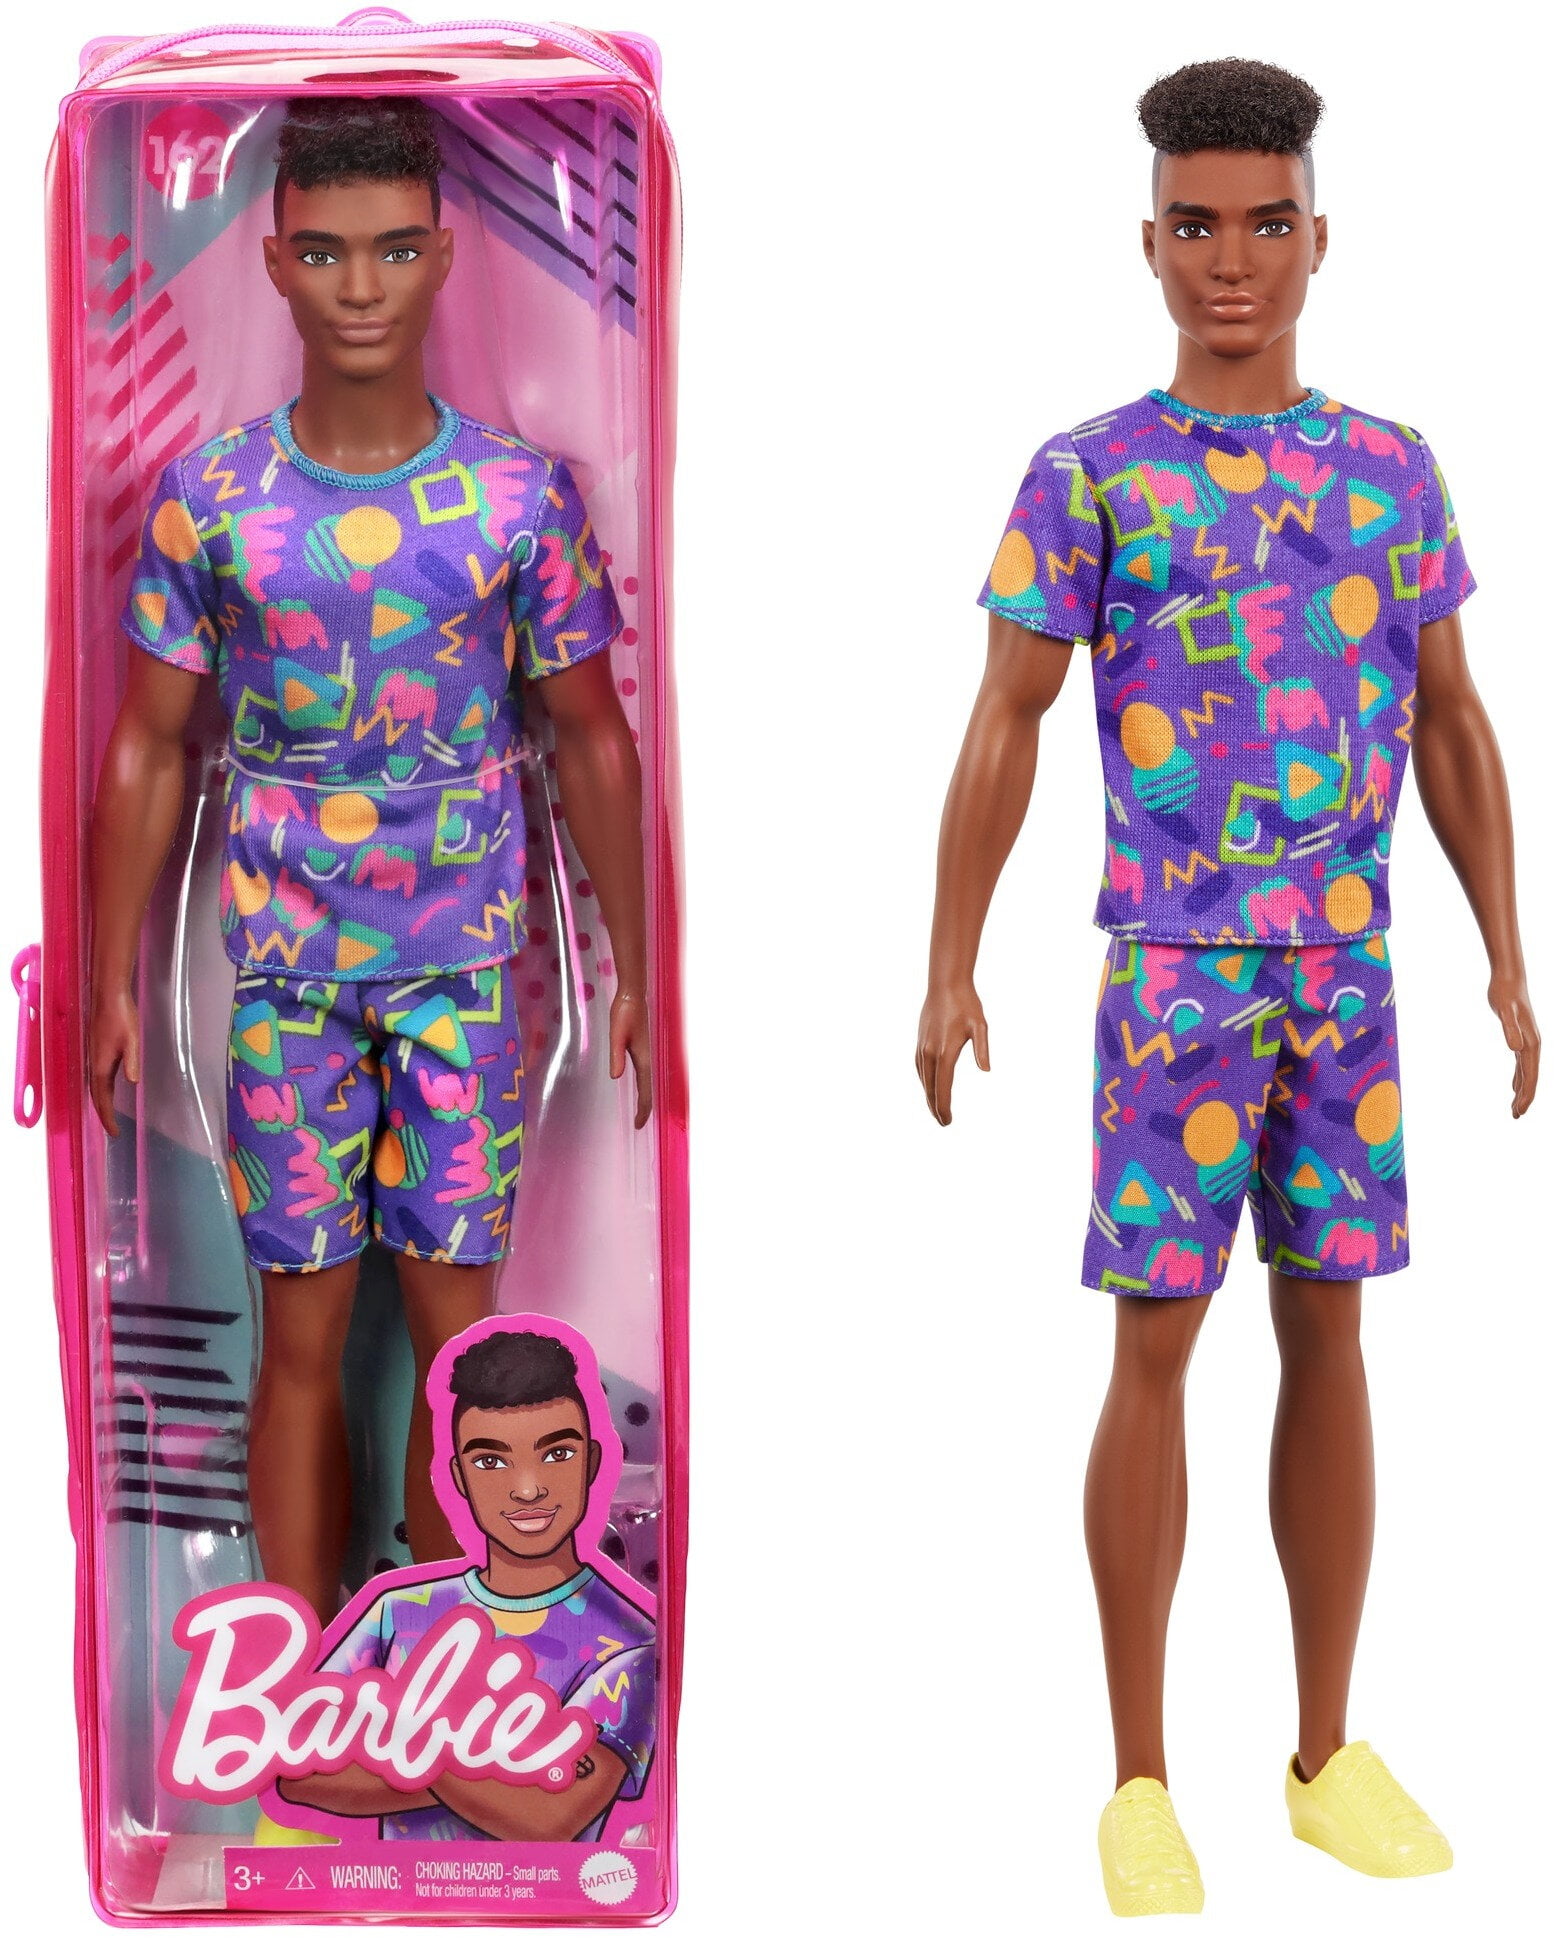 Barbie Ken Fashionistas Doll #162 with Rooted Brunette Hair Wearing Graphic Purple Top, Shorts & Yellow Toy for Kids 3 to 8 Years Old -